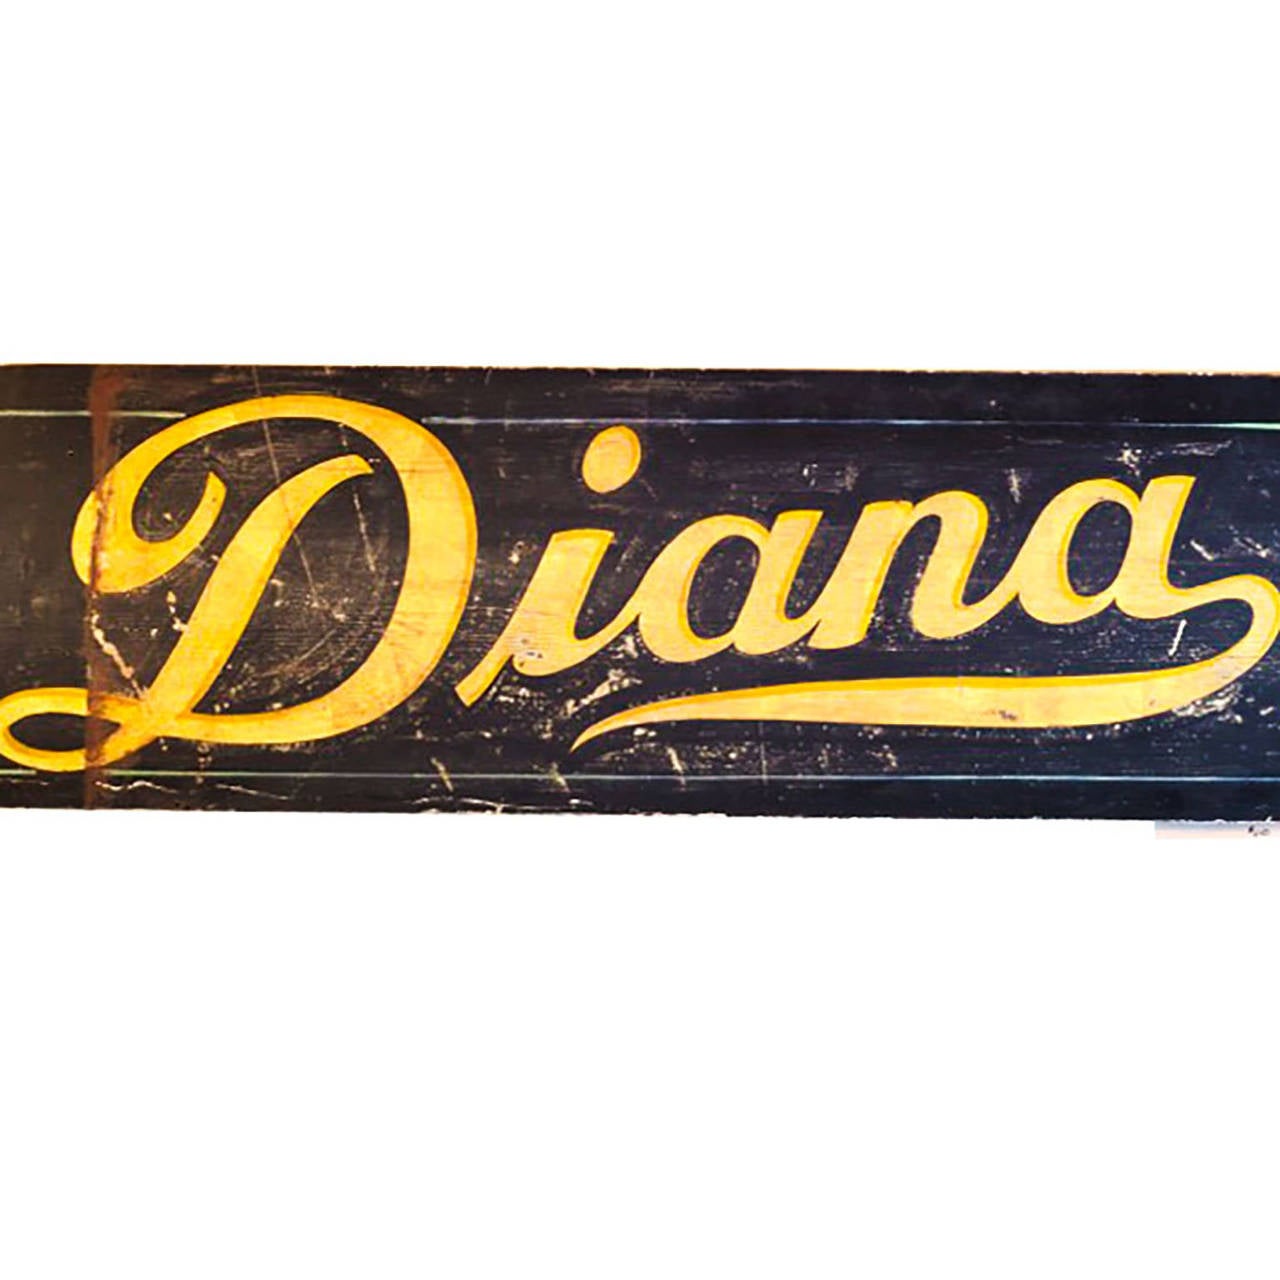 Hand painted, wooden vintage sign. Vibrant colors hand painted on wooden base. There are two holes on the left hand side for hanging vertically. 
Circa early 20th century.